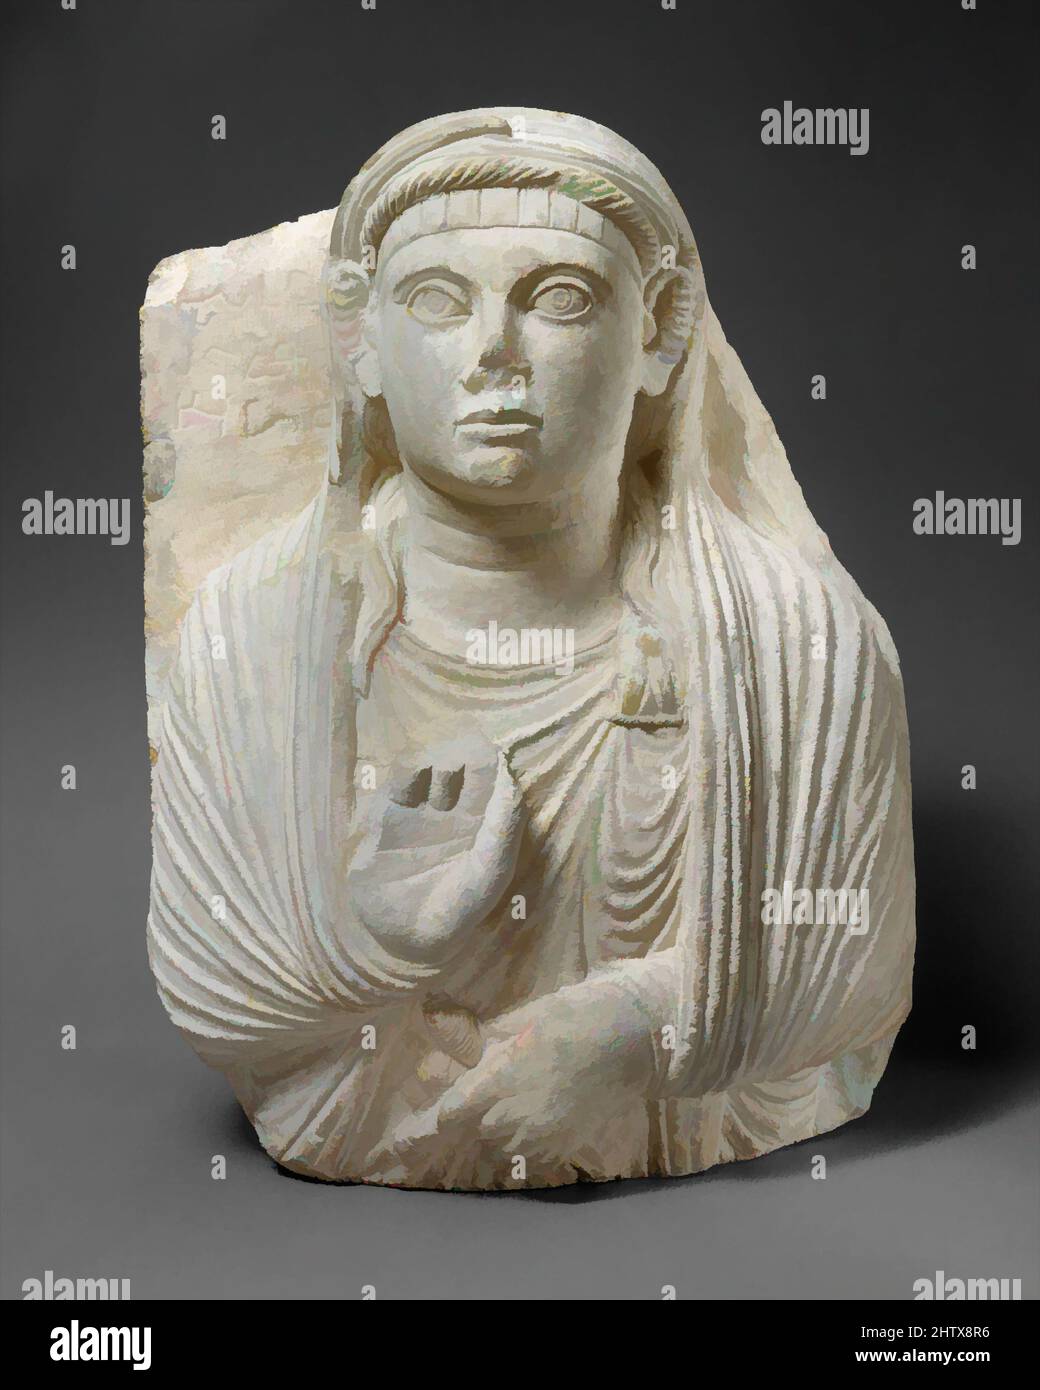 Art inspired by Funerary relief, ca. 50–150, Syria, probably from Palmyra, Limestone, 20 x 14.96 in. (50.8 x 38 cm), Stone-Sculpture-Inscribed, This relief is a type of funerary monument characteristic of the prosperous caravan city of Palmyra during the first three centuries A.D, Classic works modernized by Artotop with a splash of modernity. Shapes, color and value, eye-catching visual impact on art. Emotions through freedom of artworks in a contemporary way. A timeless message pursuing a wildly creative new direction. Artists turning to the digital medium and creating the Artotop NFT Stock Photo